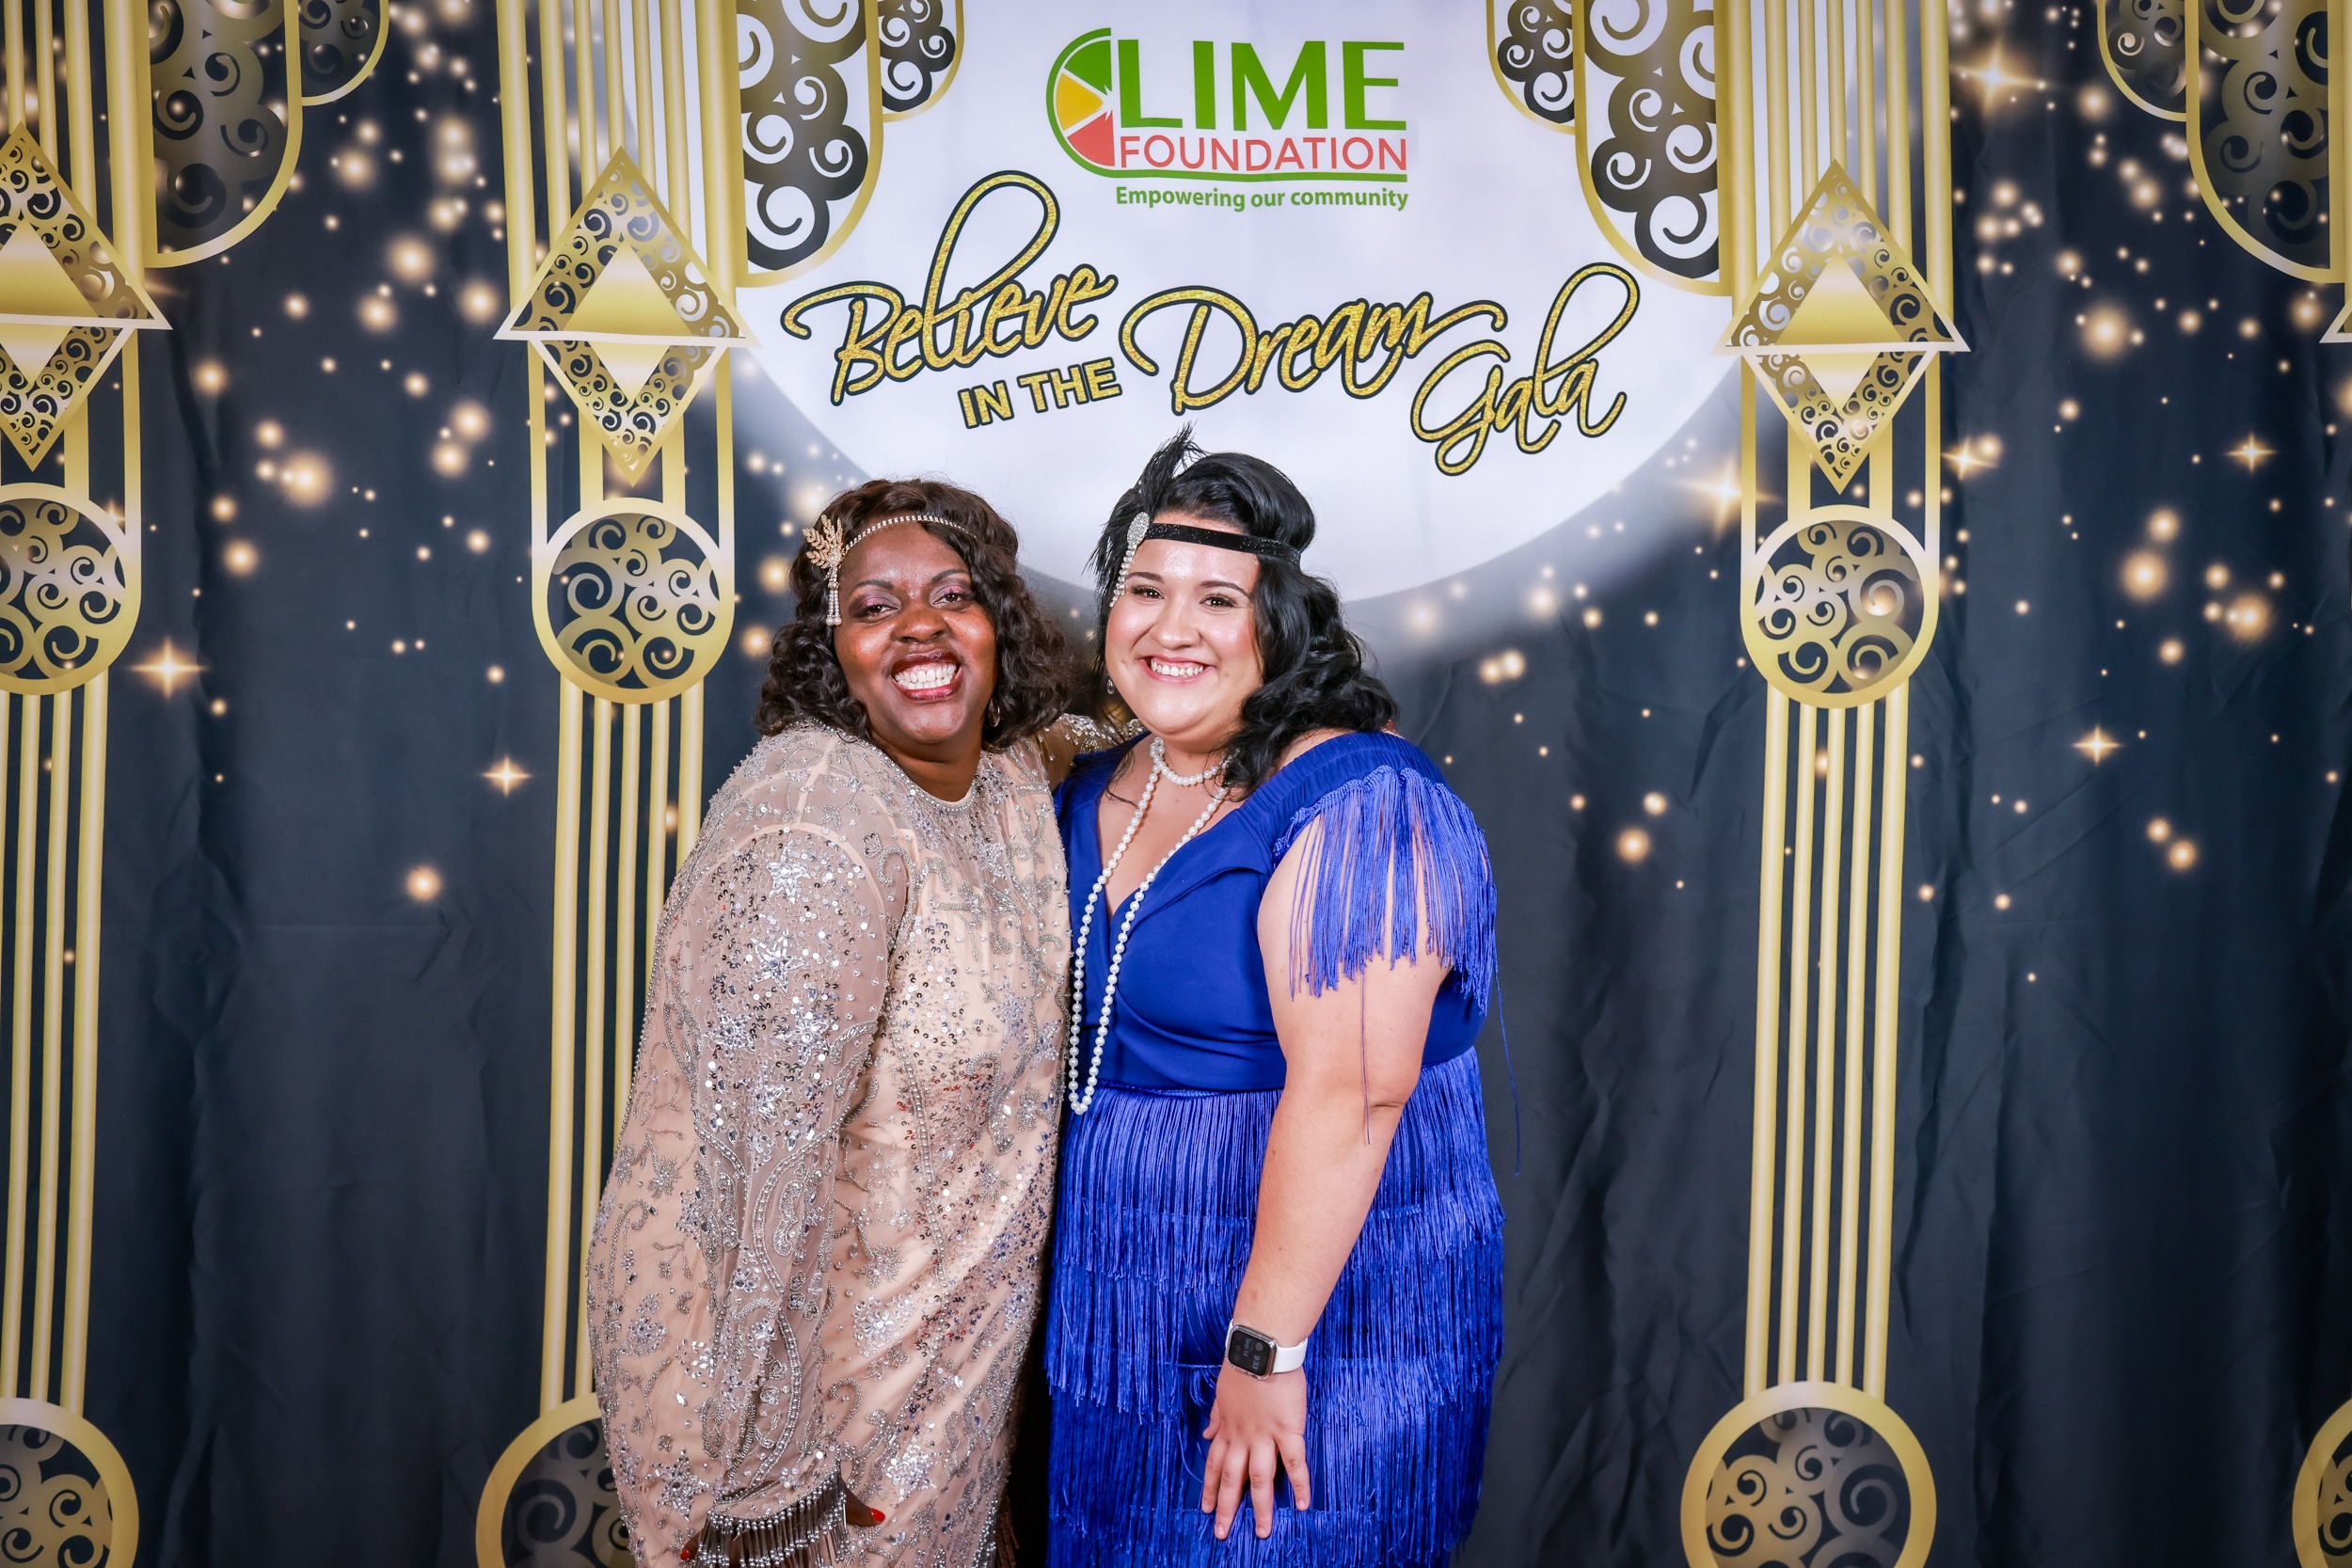 Two women posing for a photo at a 1920's themed party hosted by The LIME Foundation.